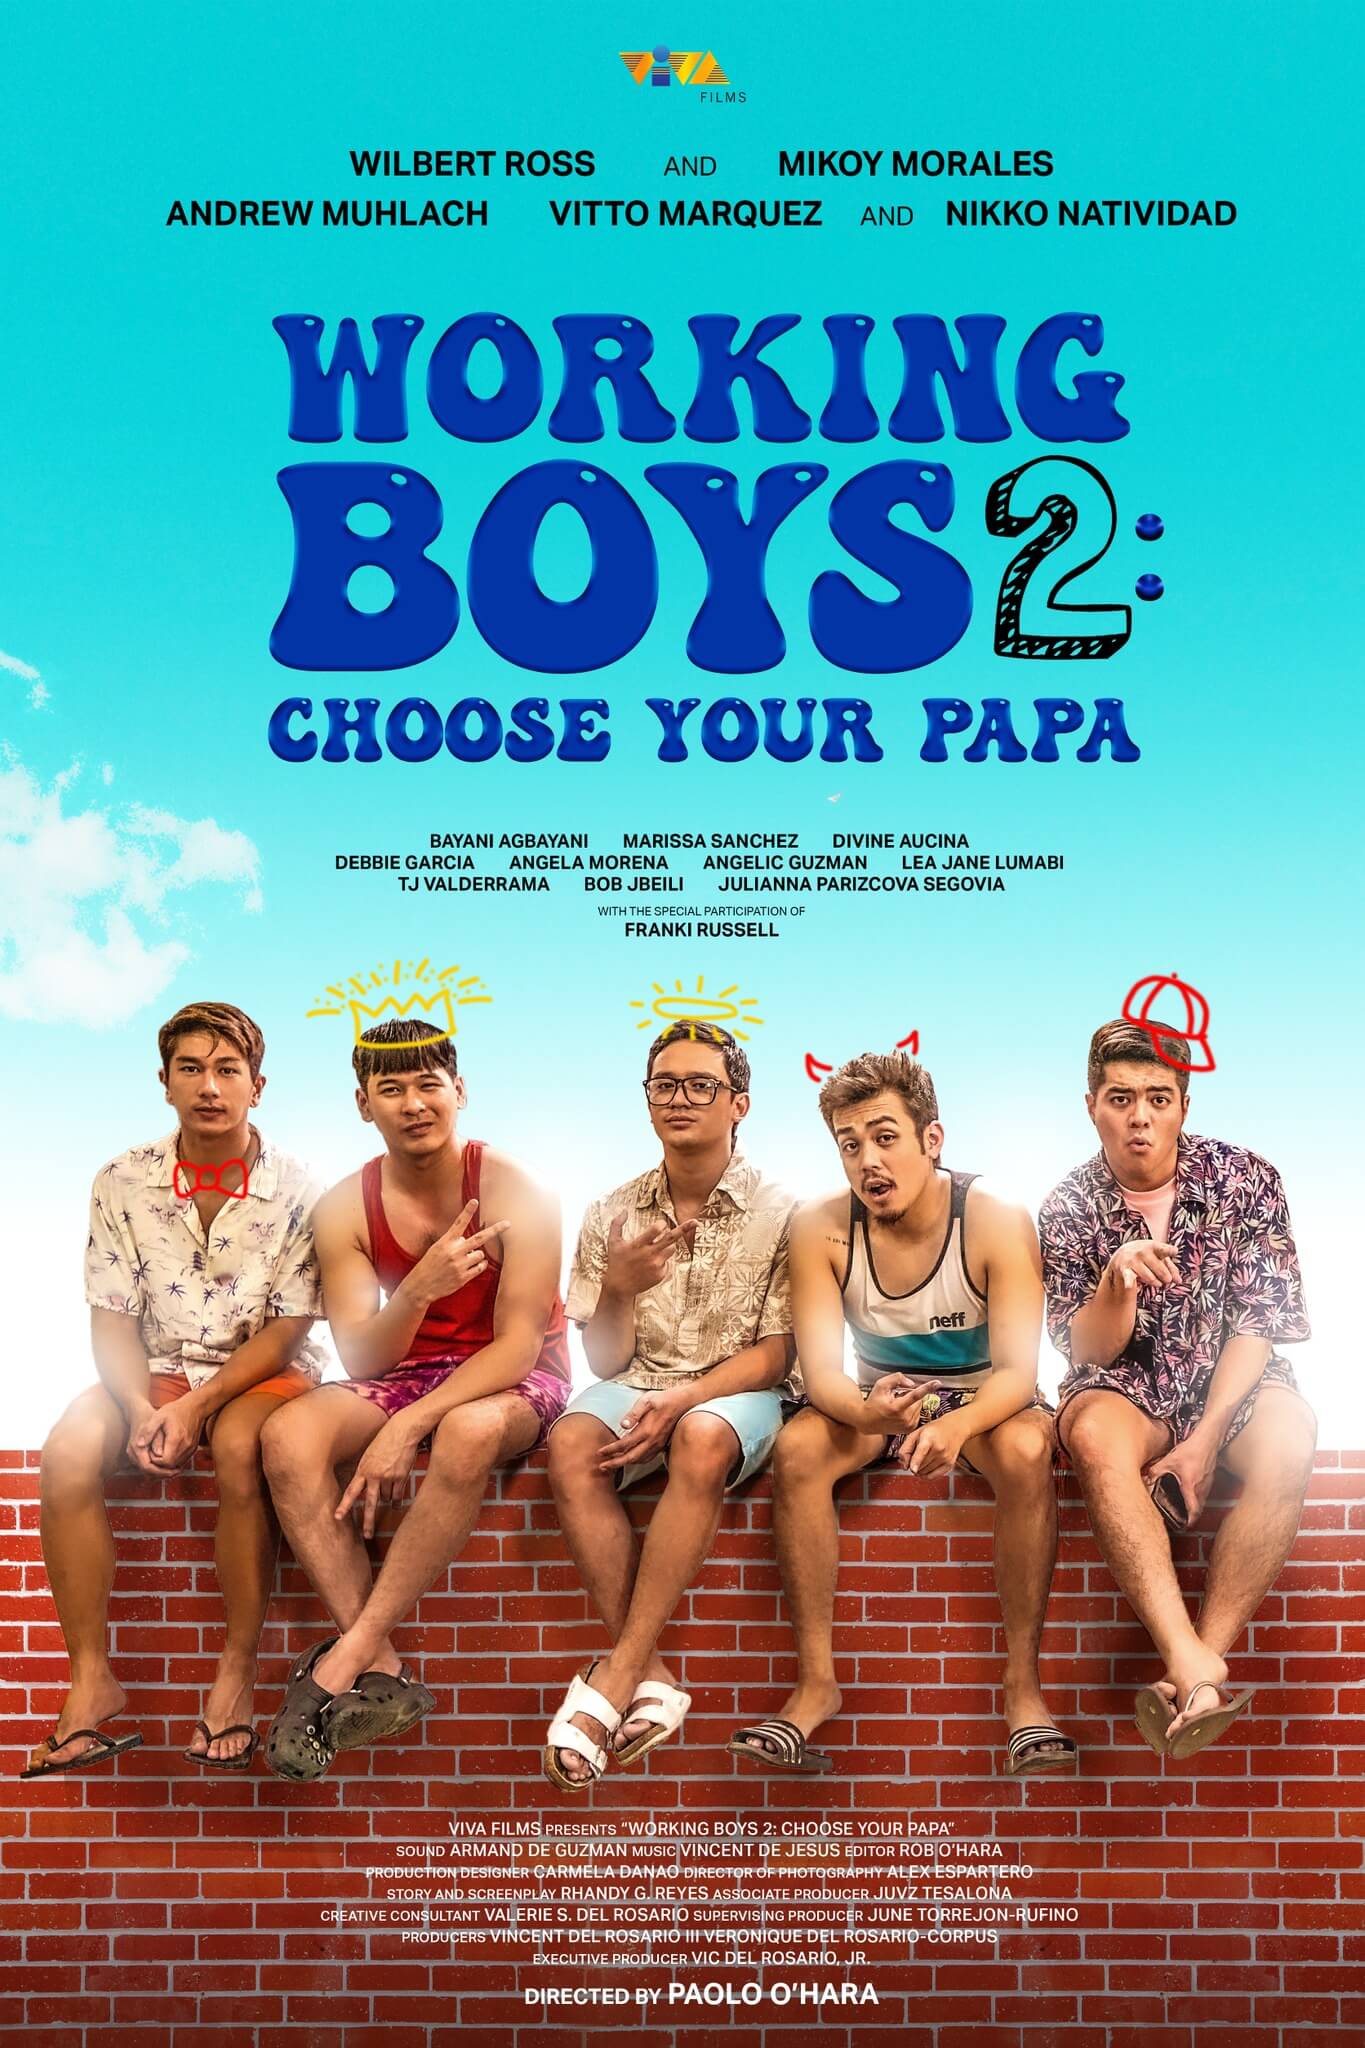 Working-Boys-2-Choose-Your-Papa-Movie-Poster